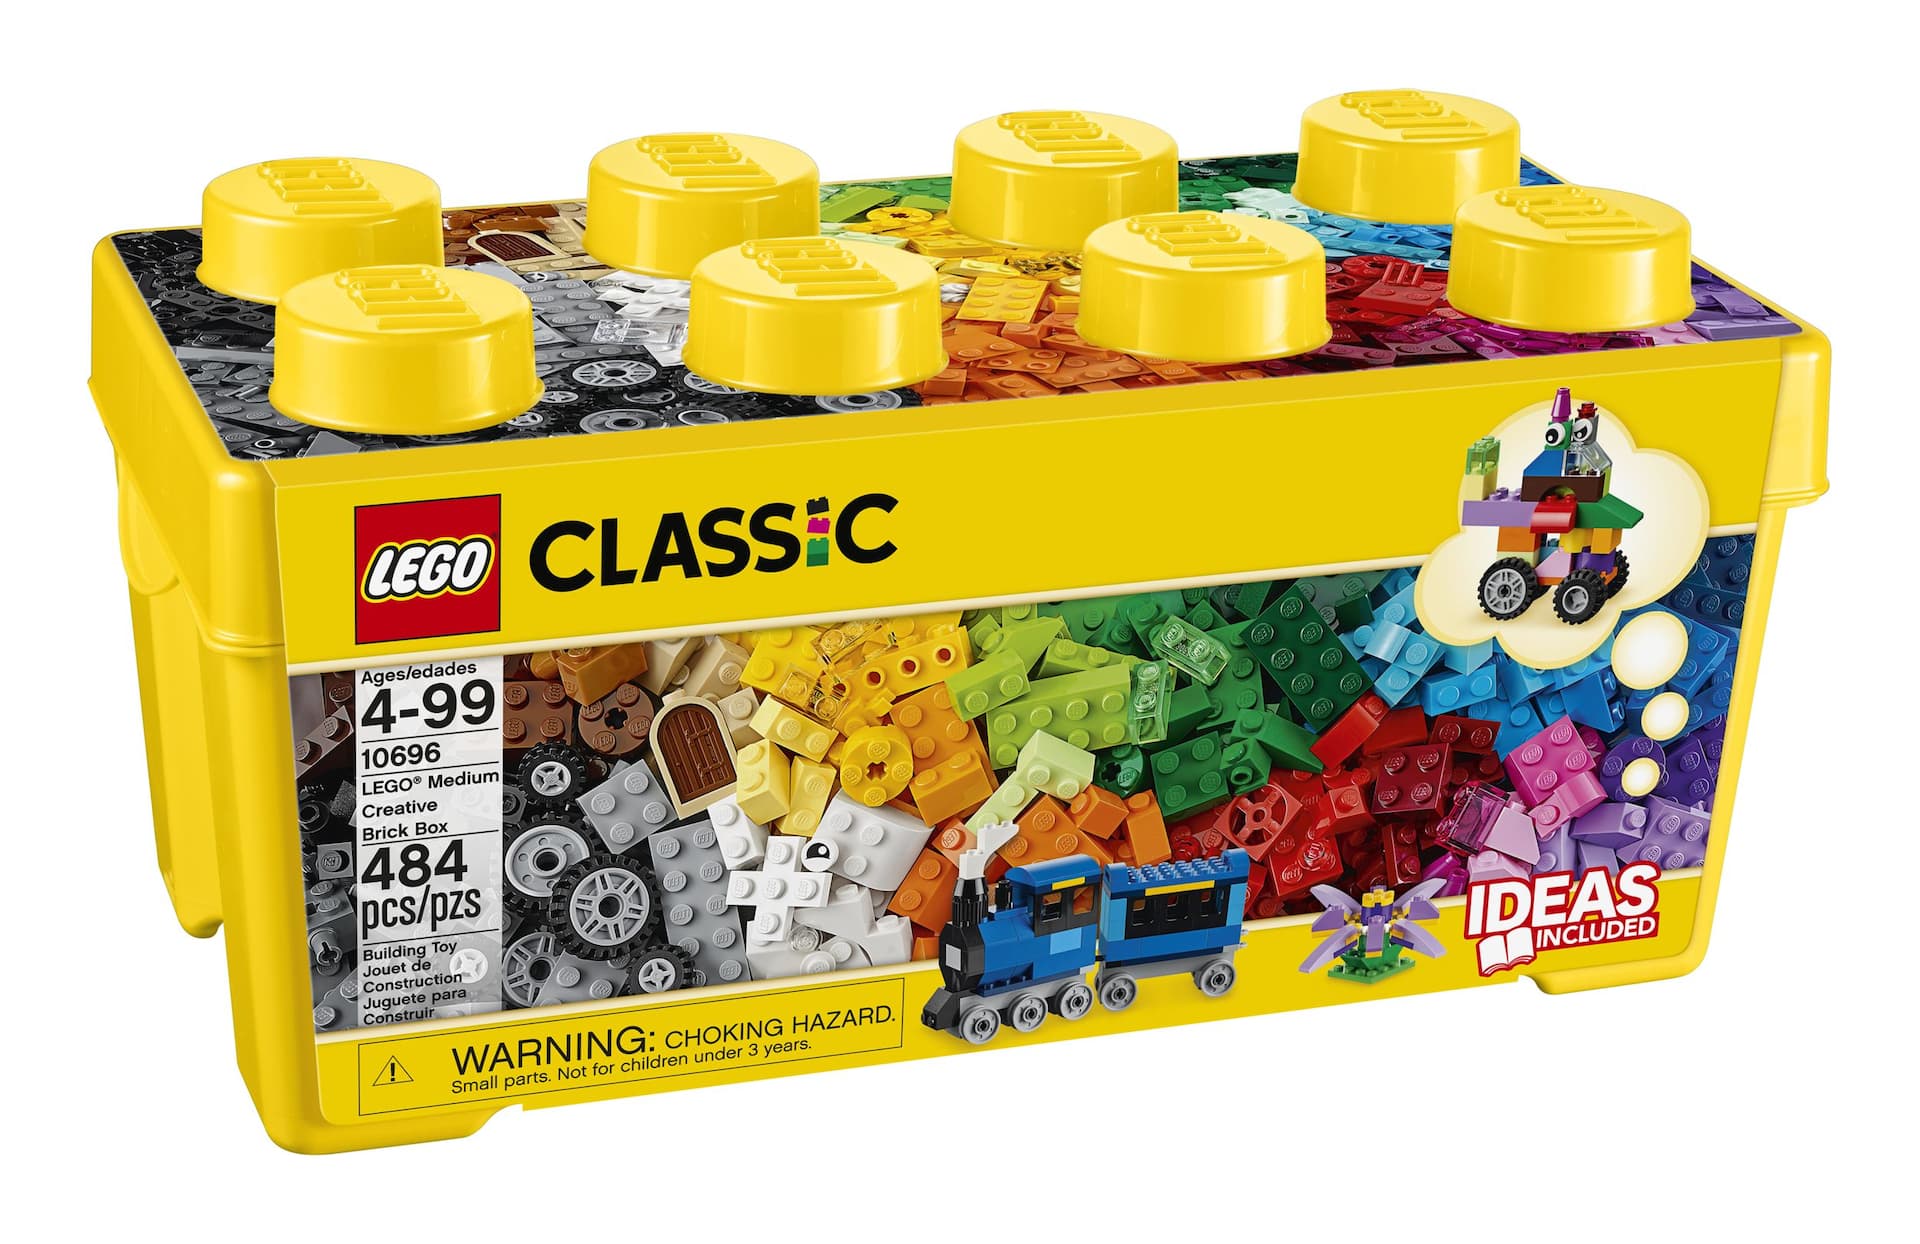 LEGO® Classic Creative Bricks Box Set 10696 Building Toy Kit For Kids,  484-pc, Ages 4+